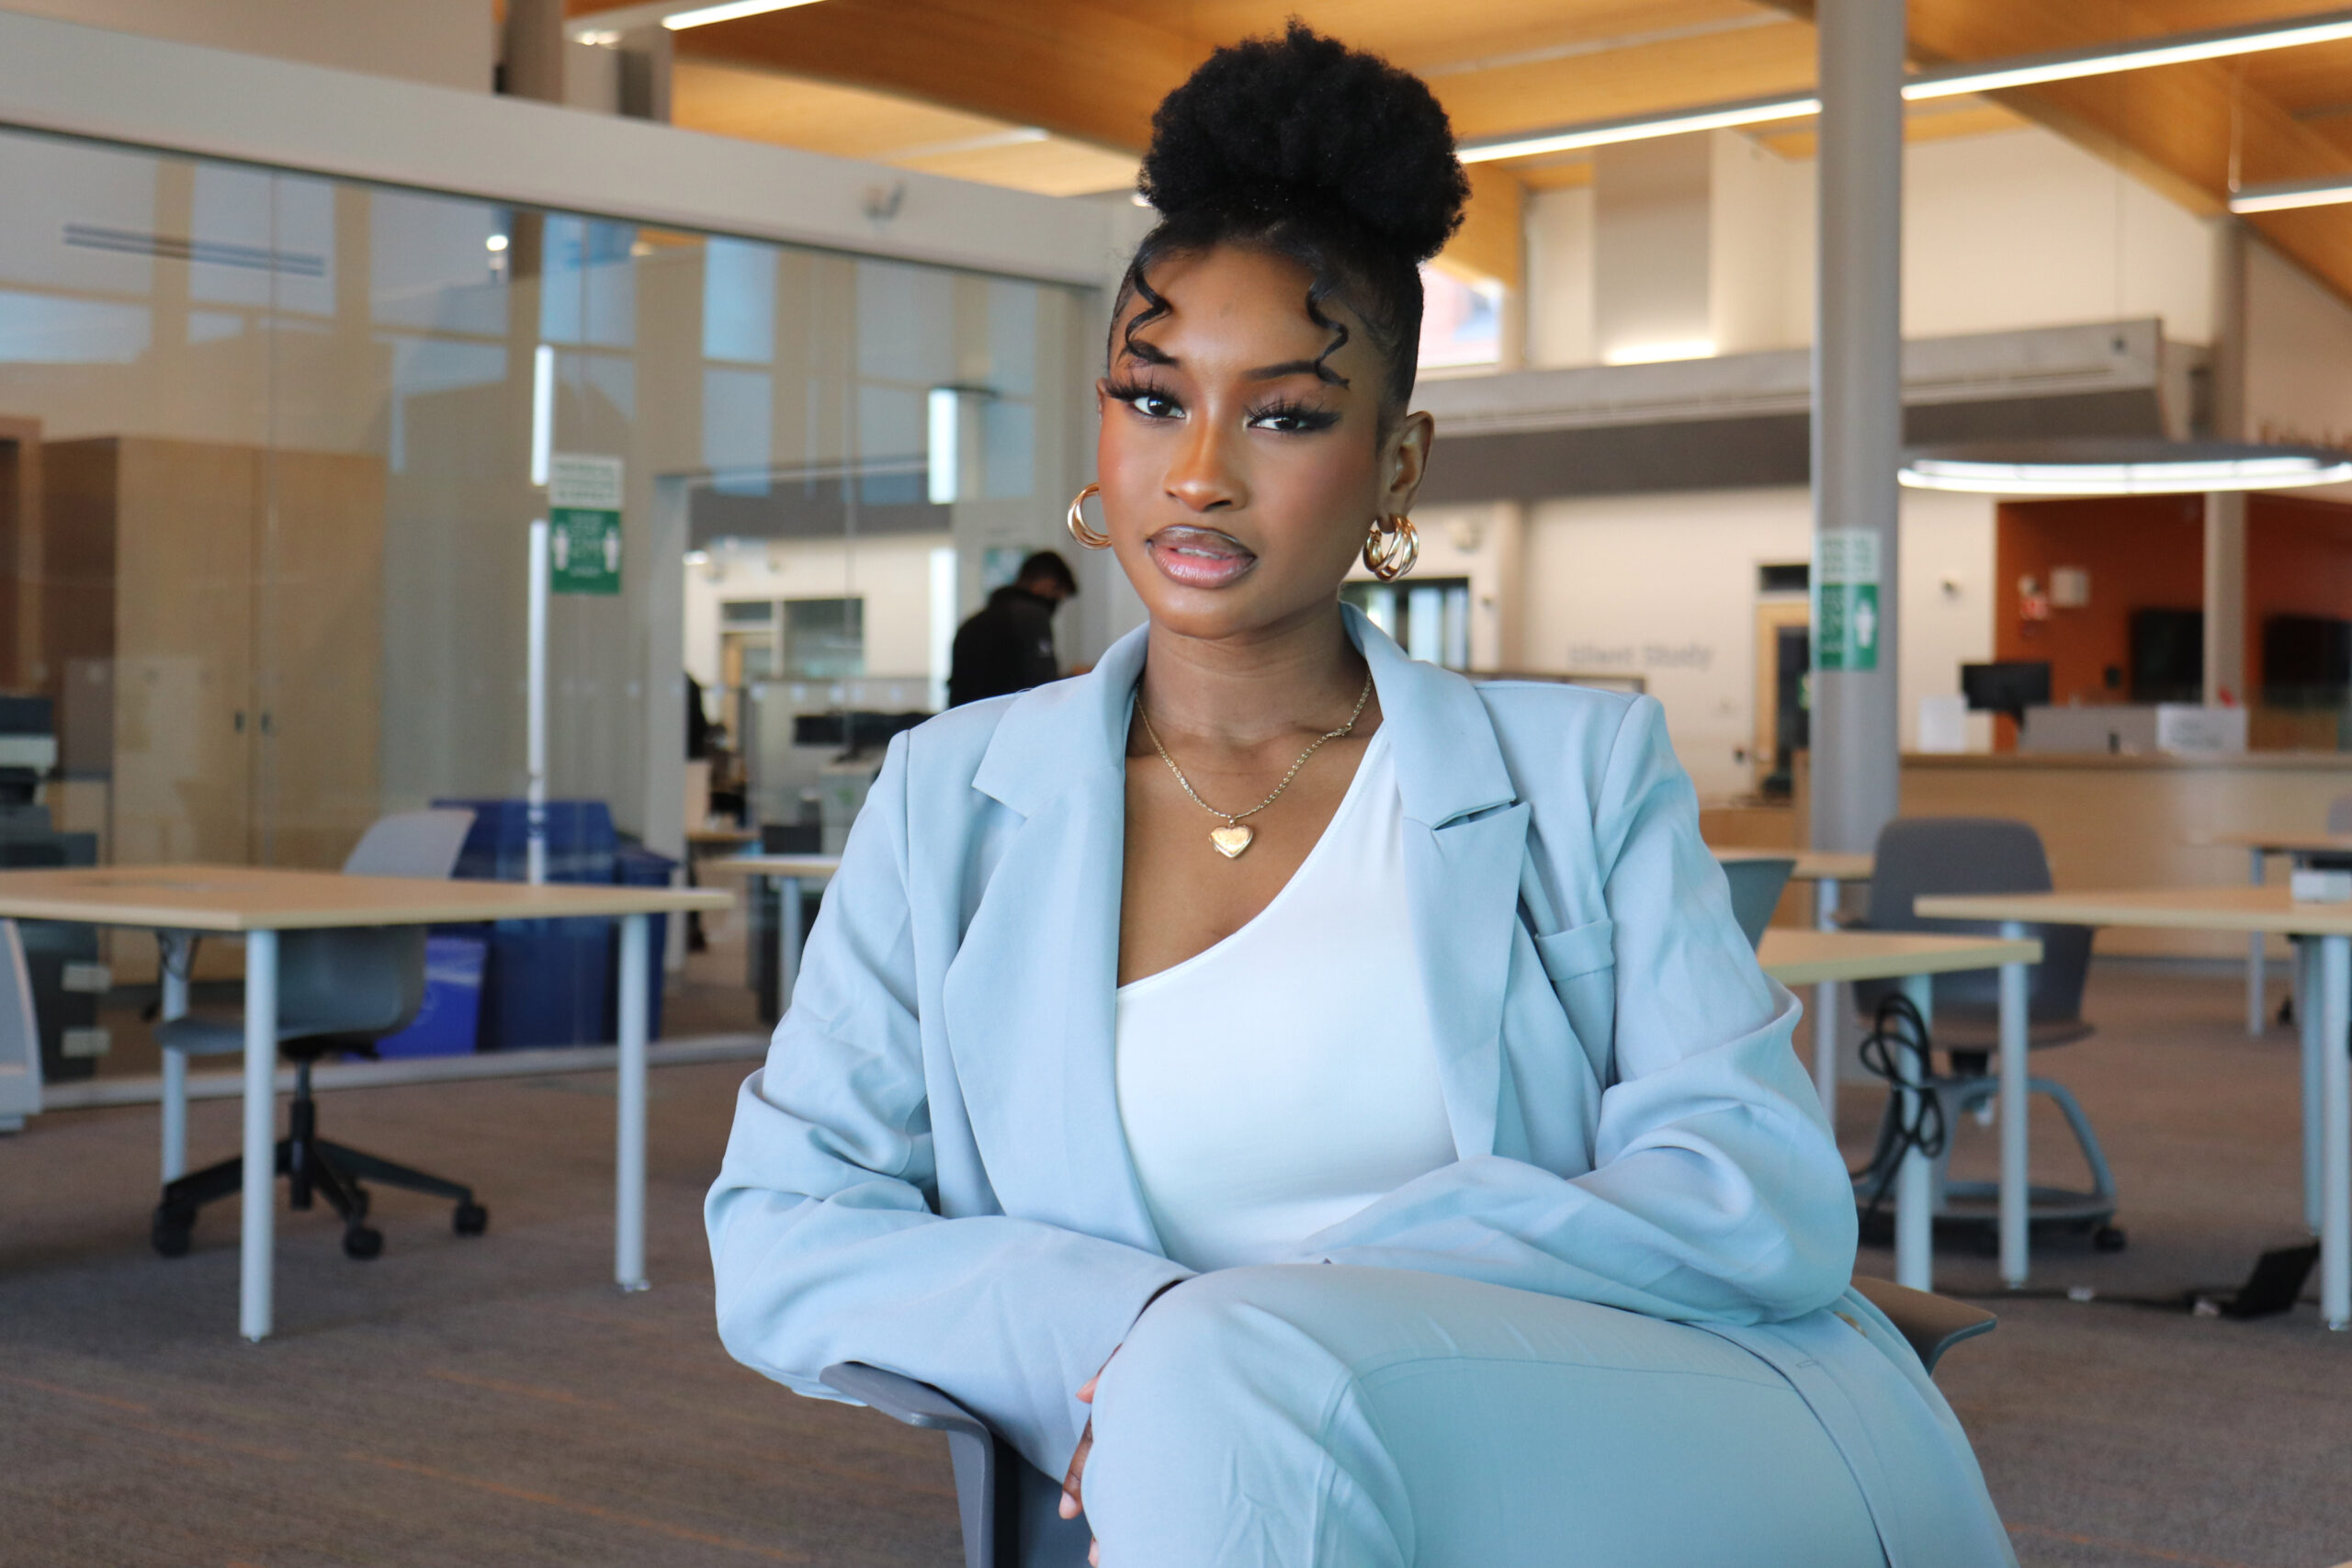 Aicha Drame is grateful for what she has learned in the business management and entrepreneurship program.